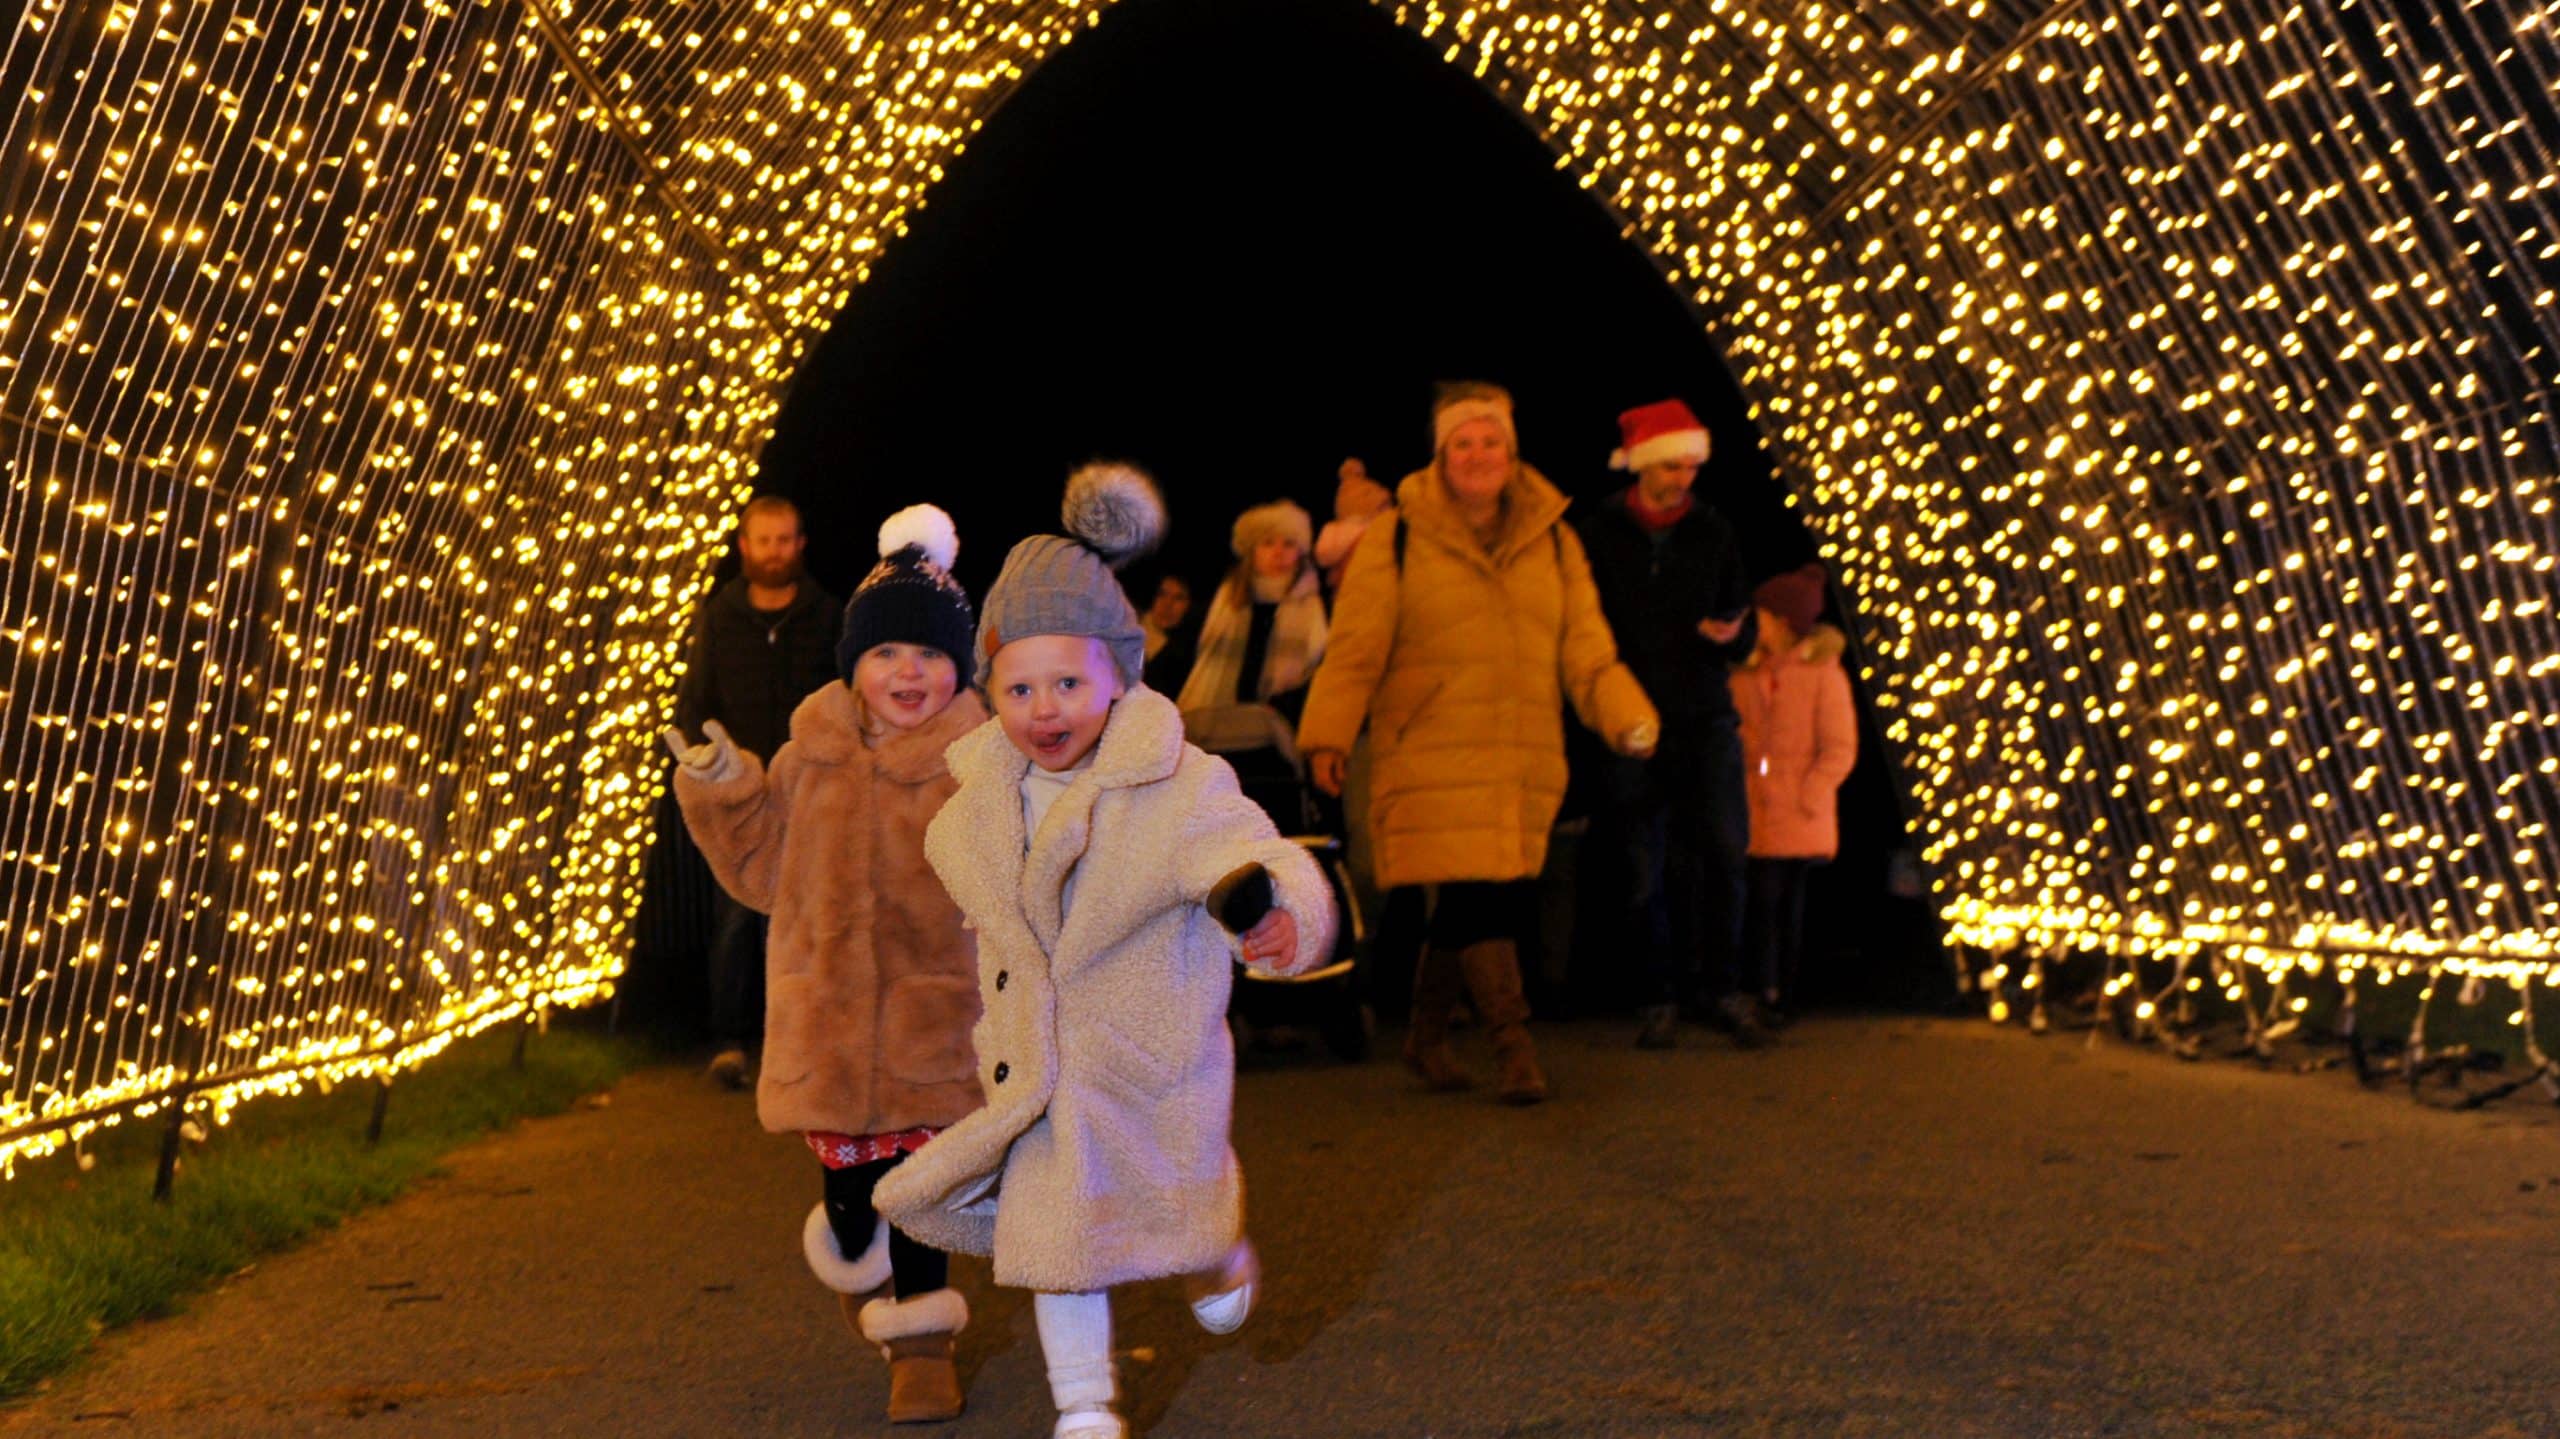 A Spectacular Christmas Light Experience the whole family will love